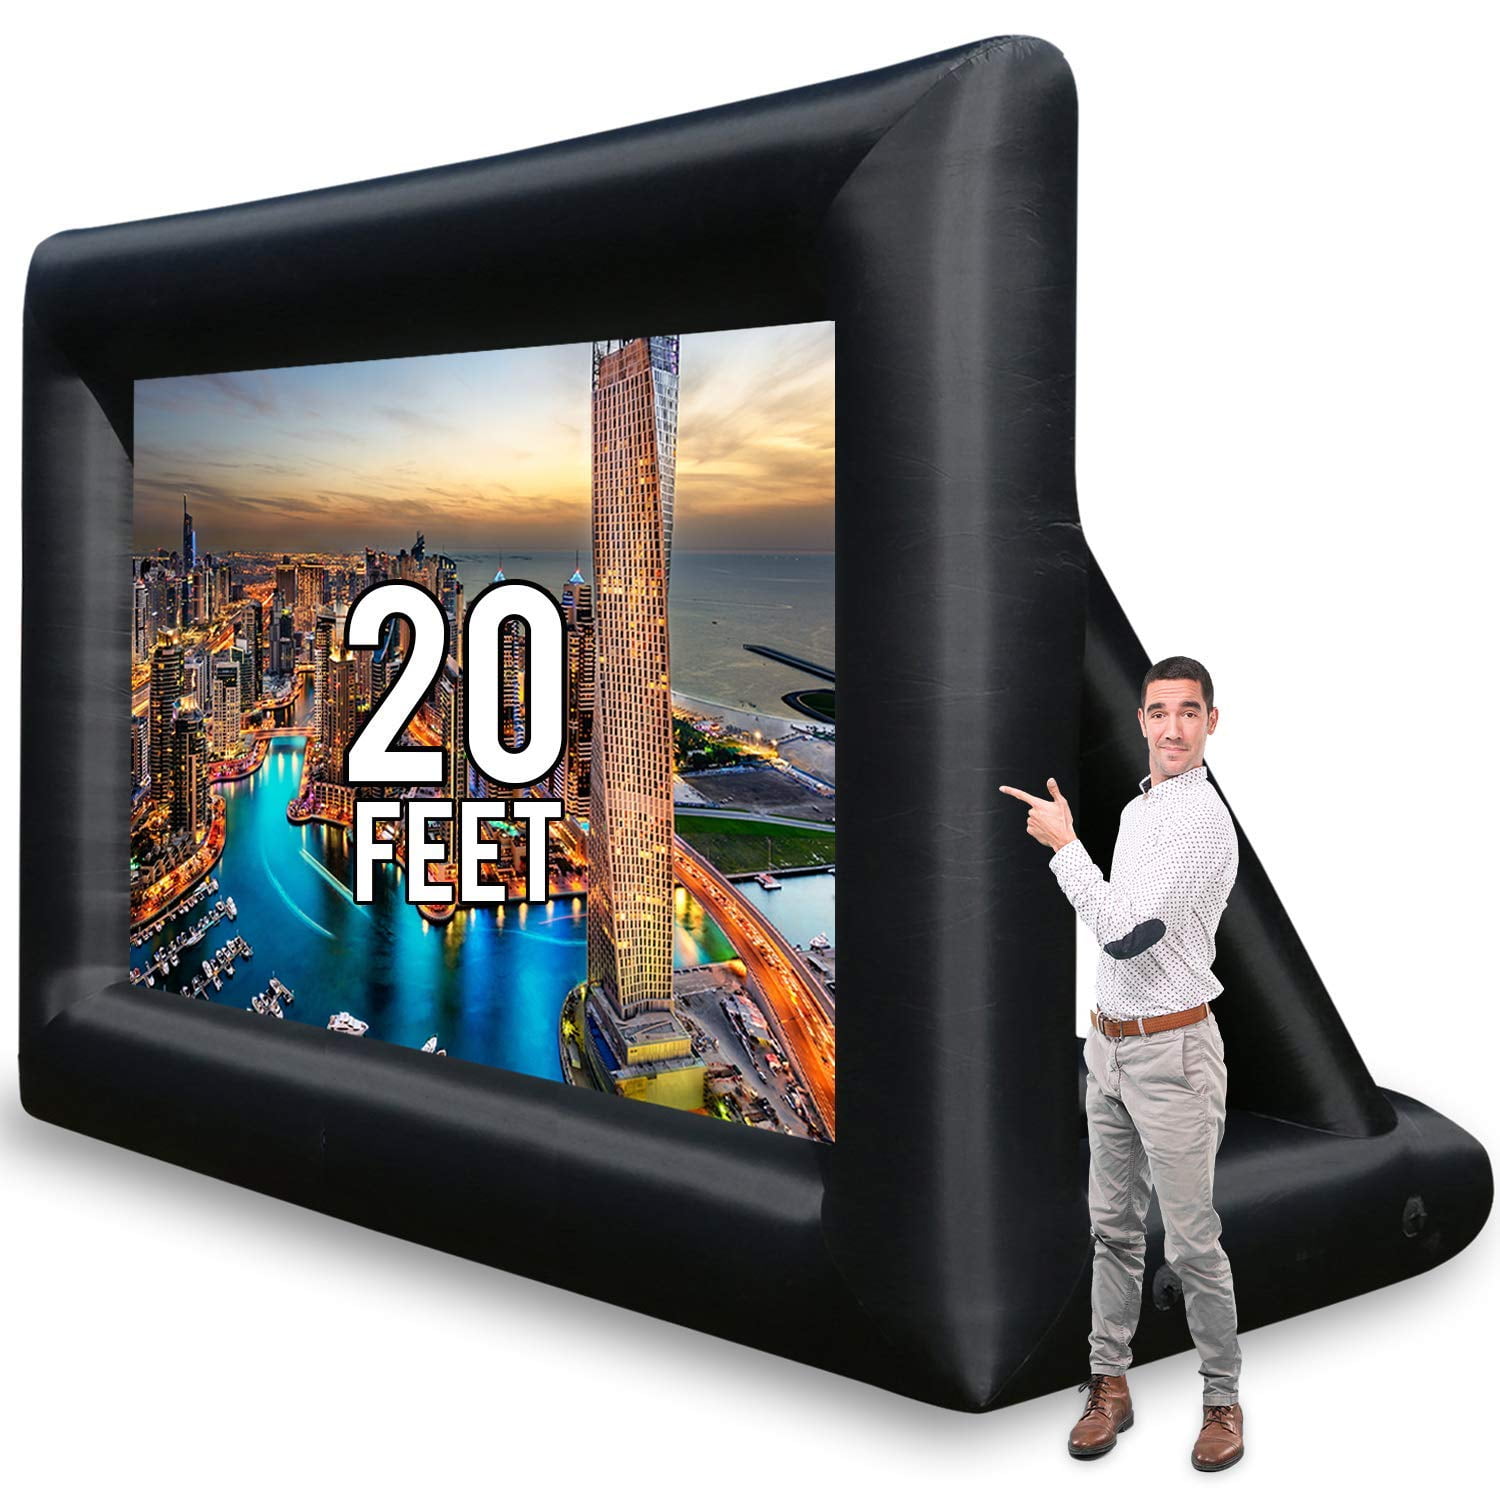 Tusy 14 foot Outdoor Inflatable Movie Projector Screen Review - YouTube